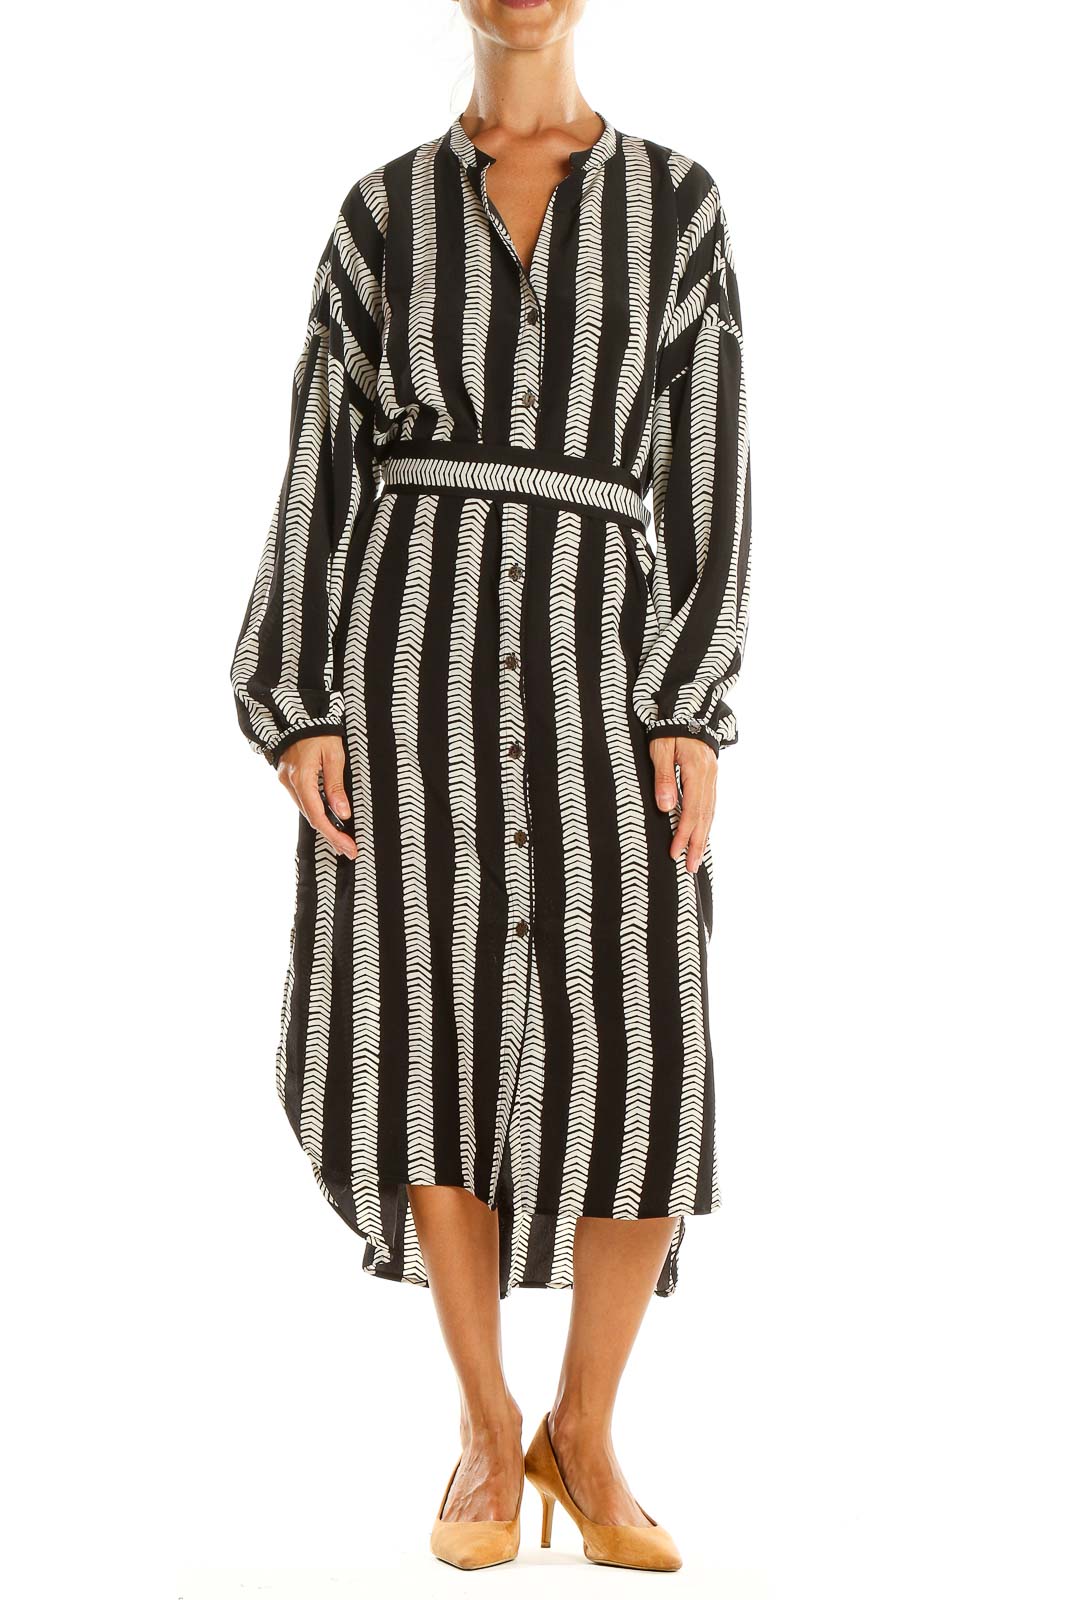 Black Striped Bohemian Fit & Flare Dress Front